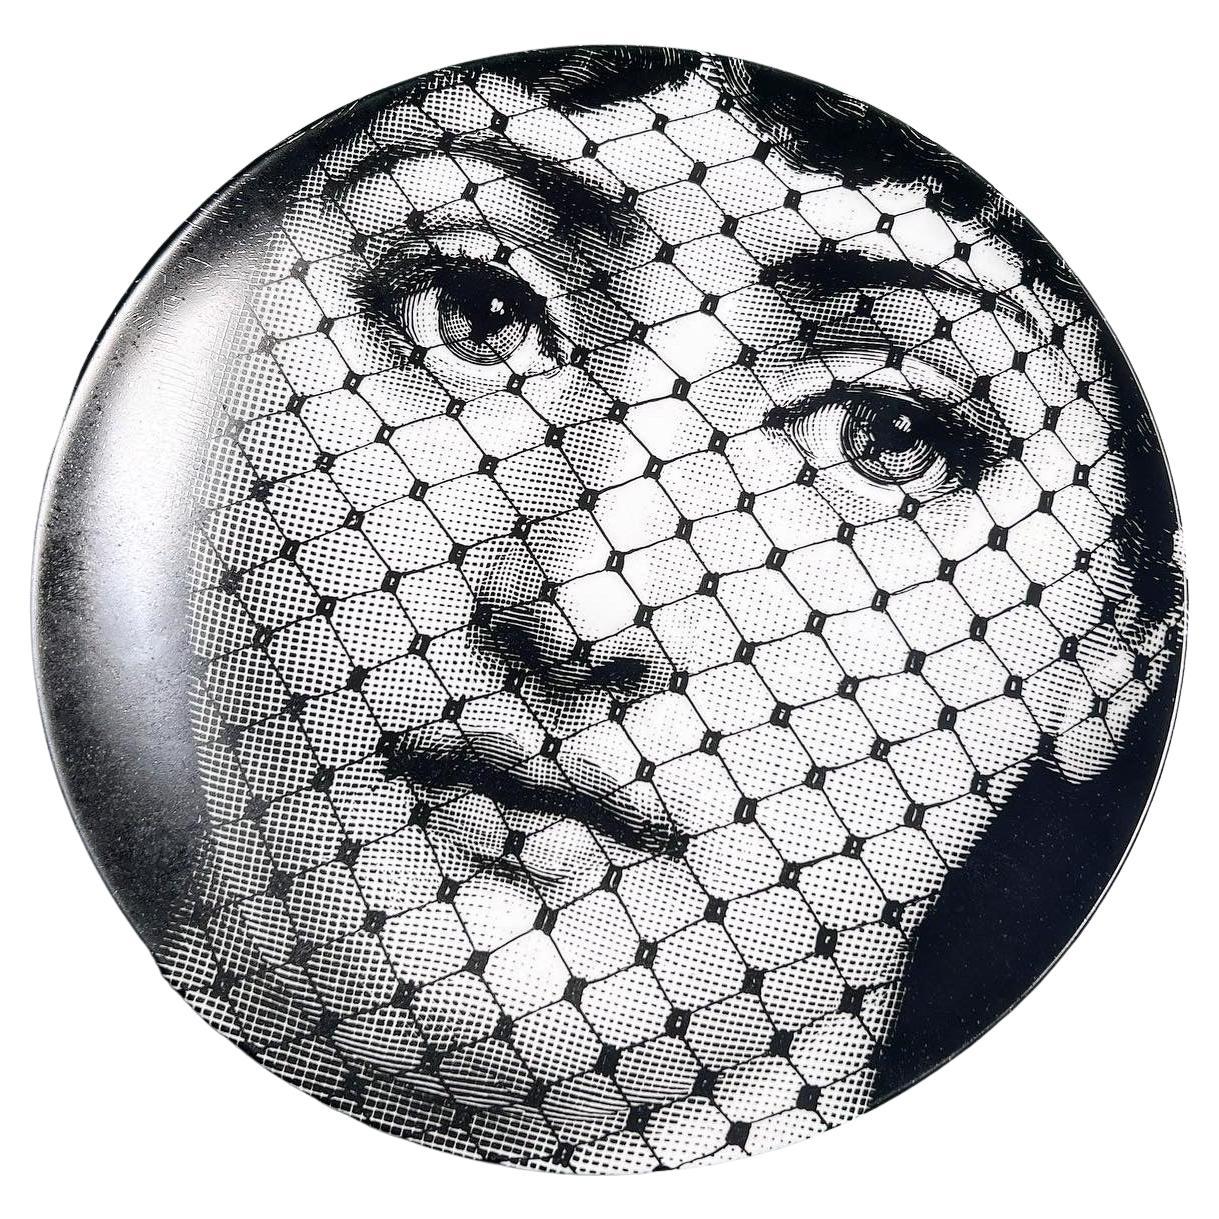 Fornasetti hand painted decorative plate, "Tema e Variazioni" 78, made in Italy For Sale